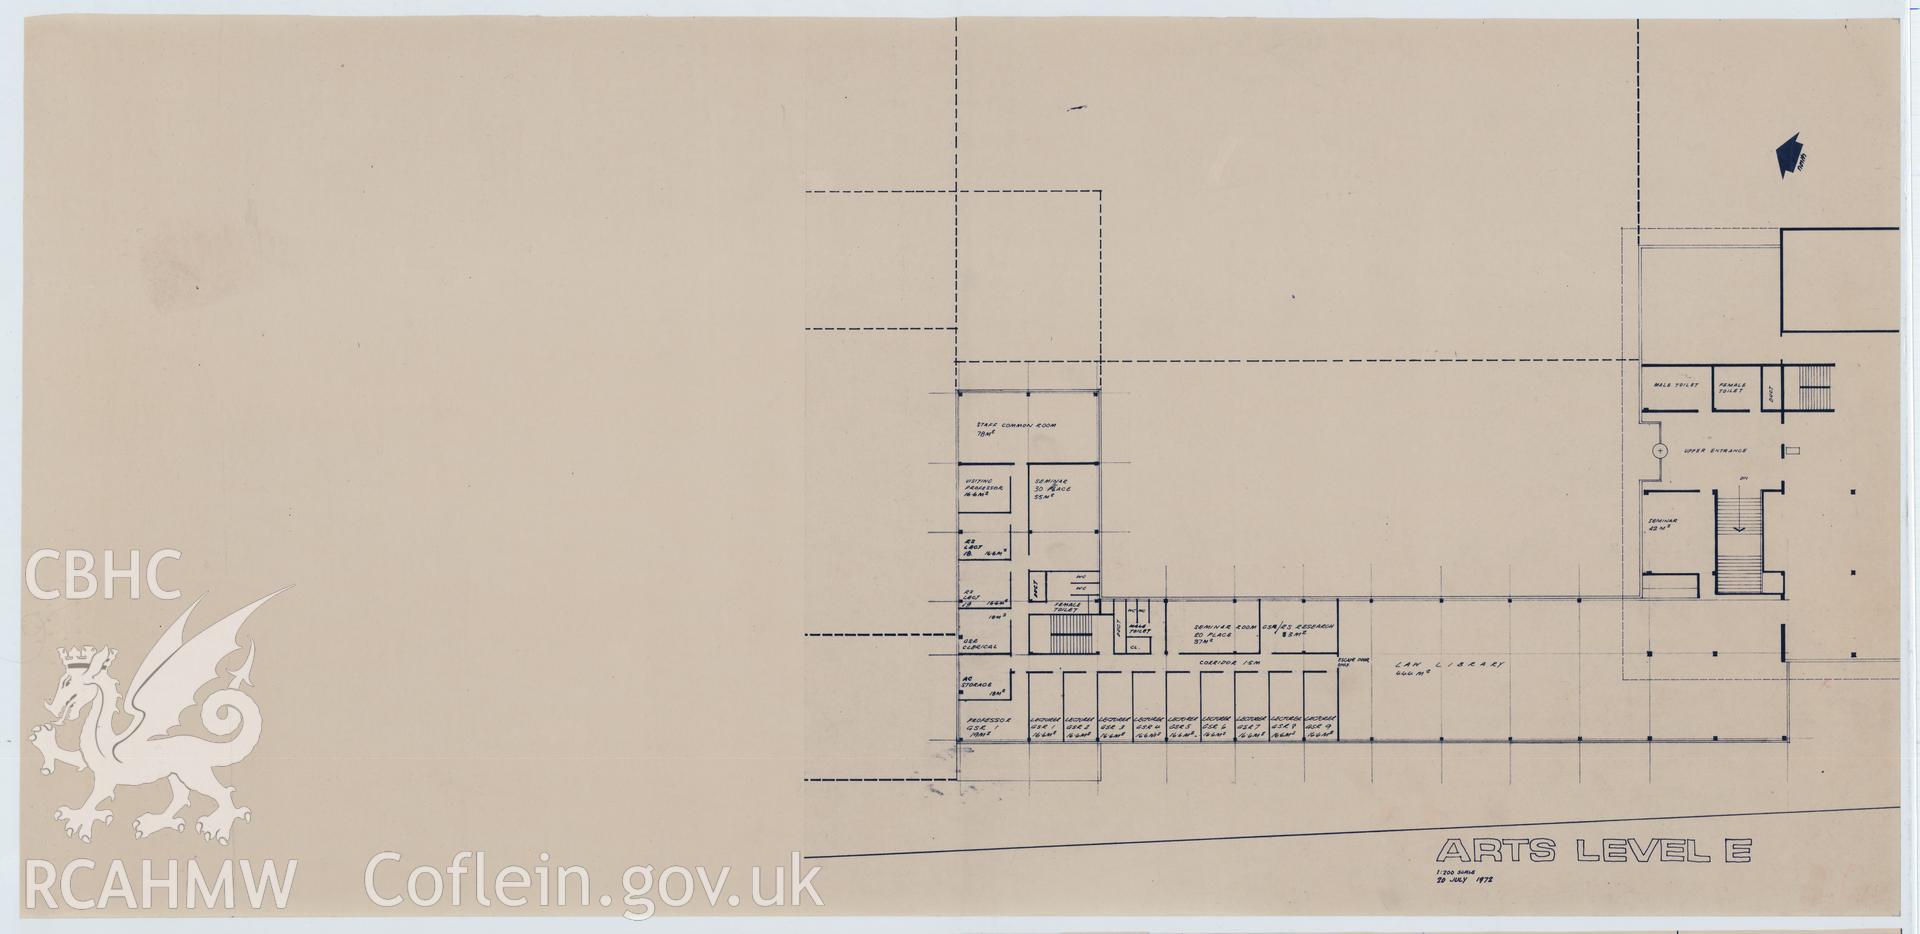 Digital copy of a plan showing Arts Level E of the proposed Library Arts Complex at University College Aberystwyth, produced by Percy Thomas Partnership. Scale 1:200